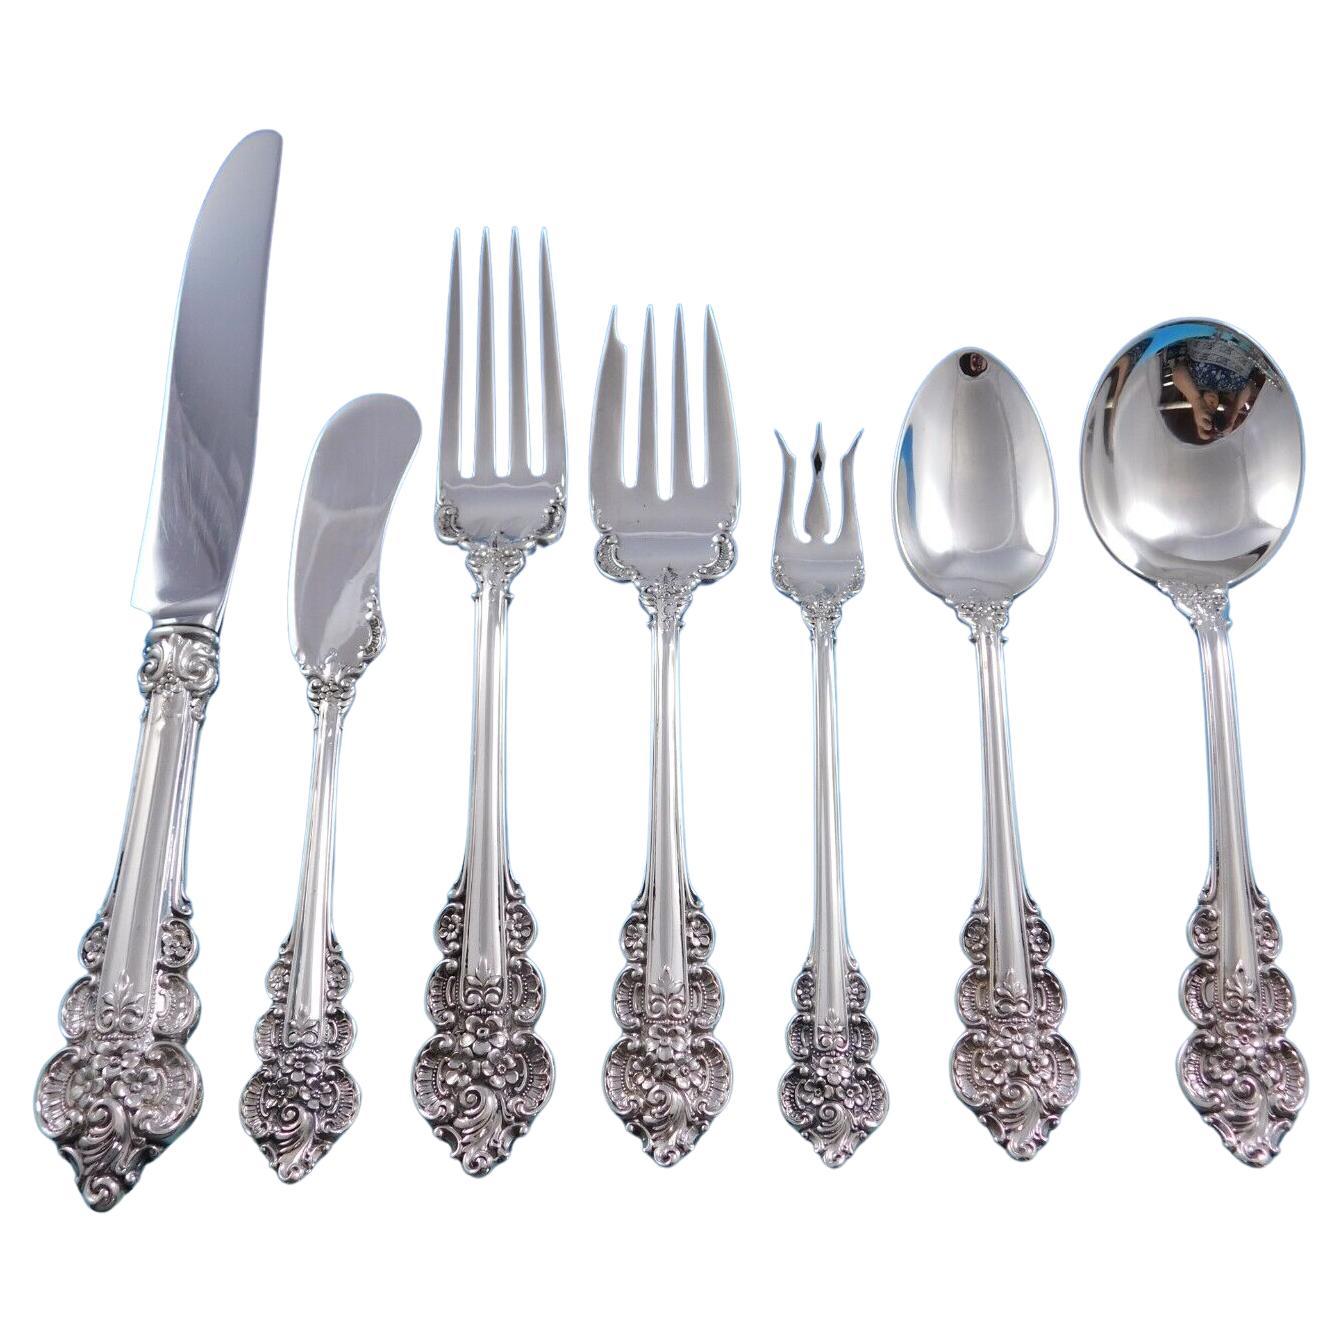 Botticelli by Frank Whiting Sterling Silver Flatware Set 12 Service 91 pieces